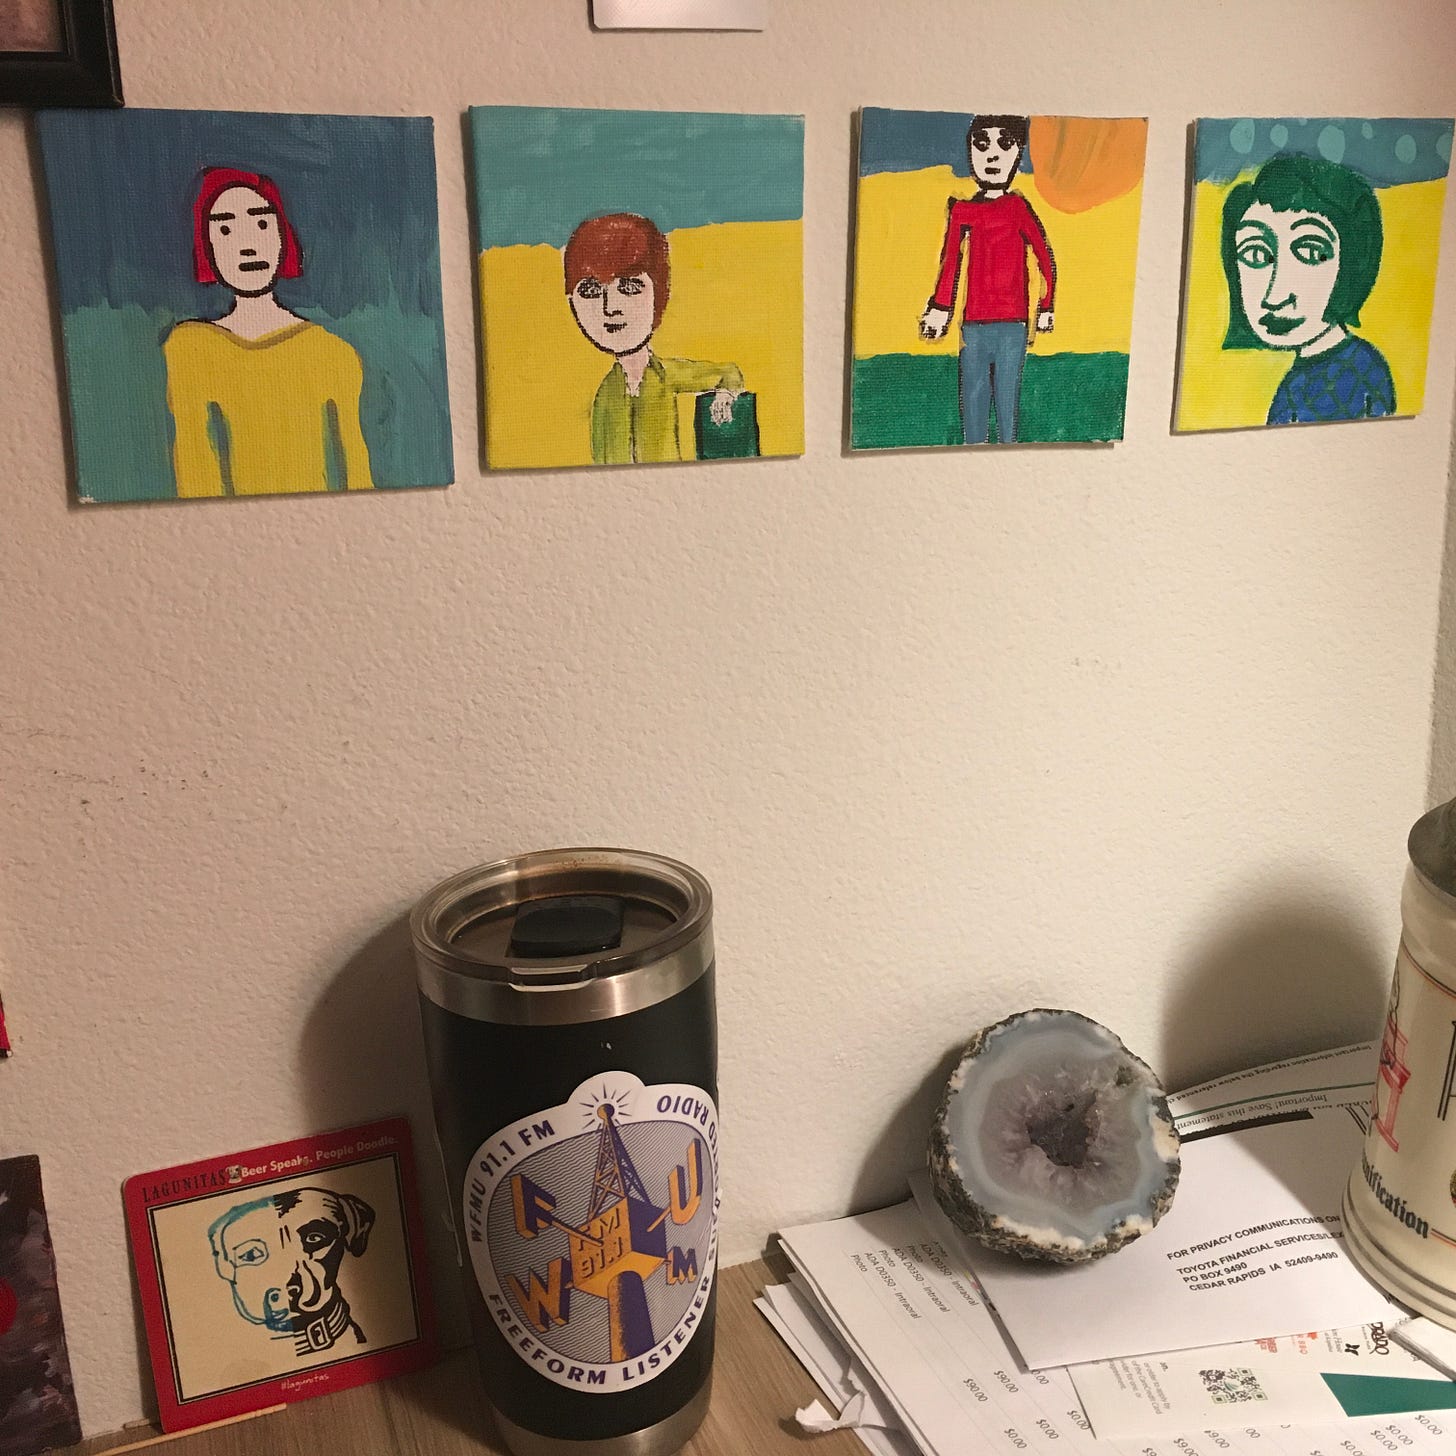 A photo of some paintings and various items on the author's desk.